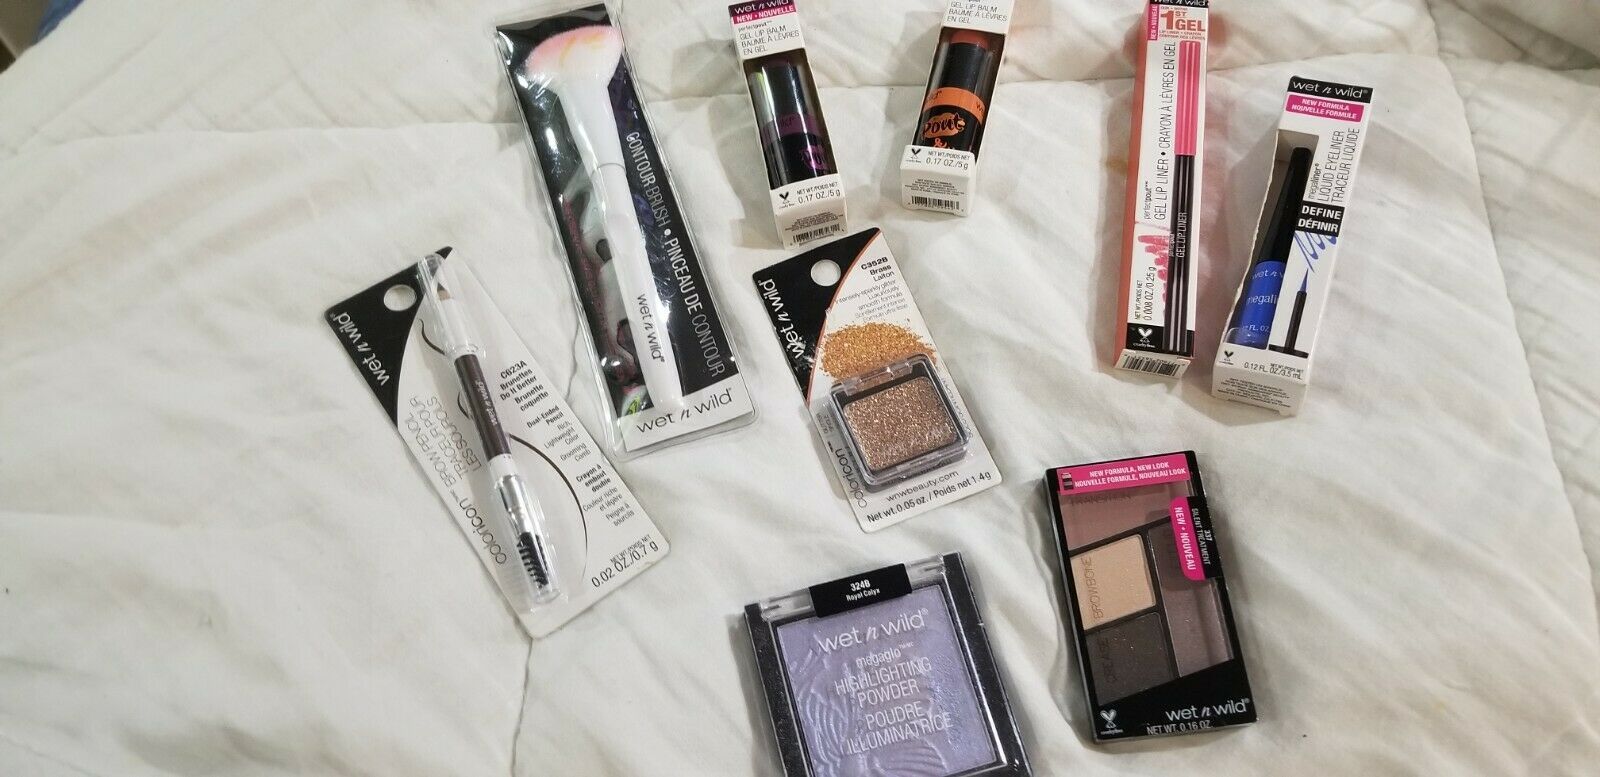 Primary image for Wet n wild makeup lot